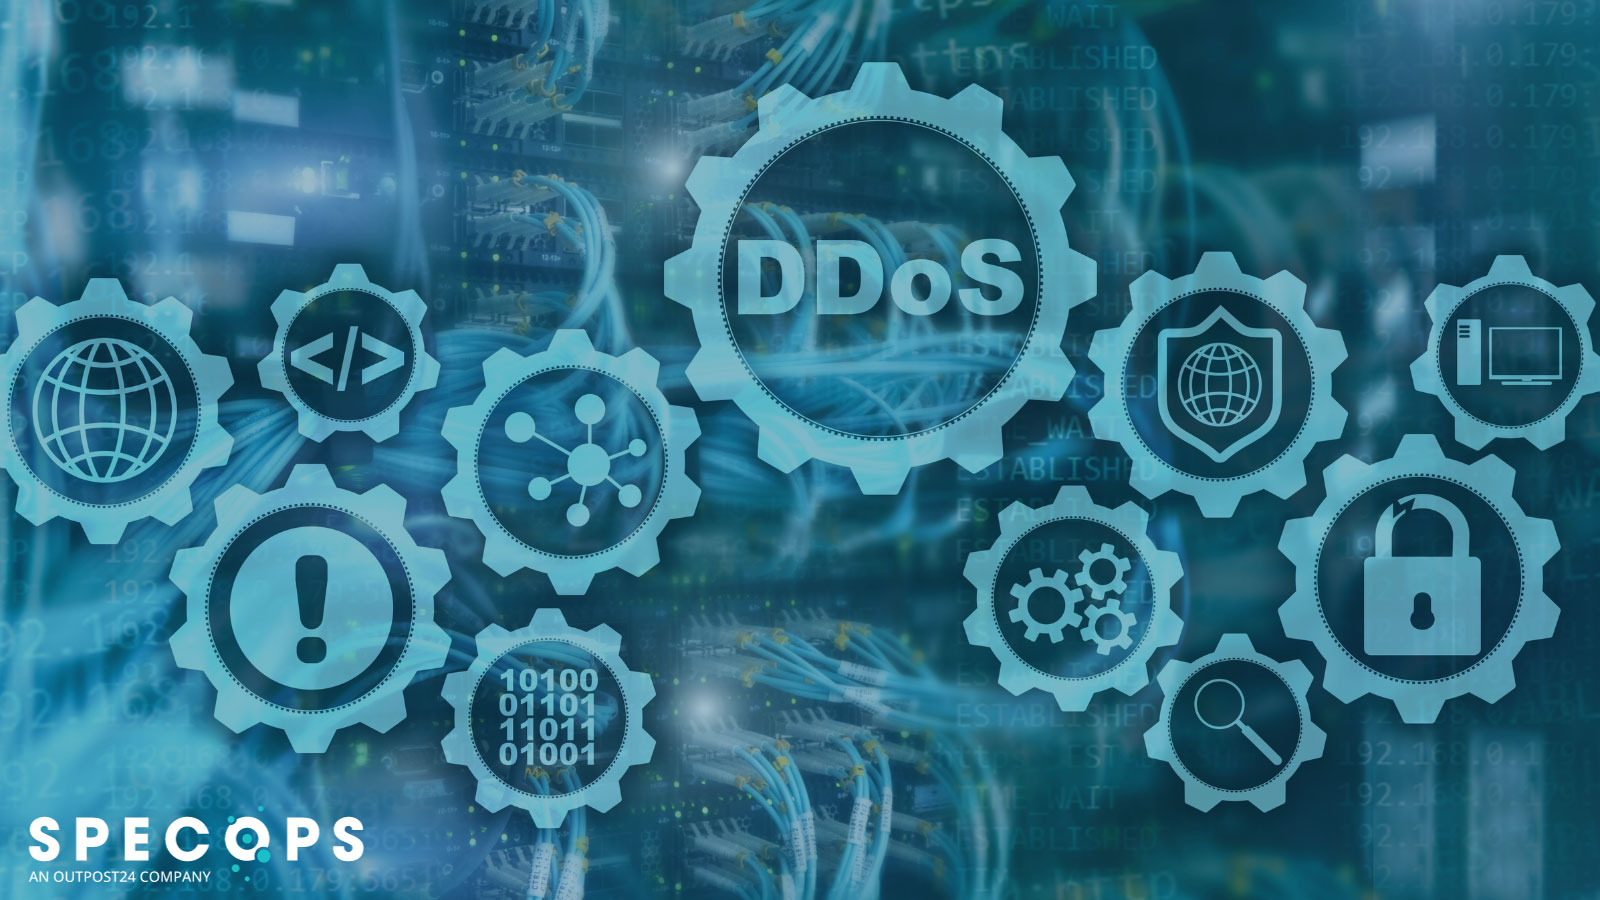 How DDoS attacks are taking down even the largest tech companies